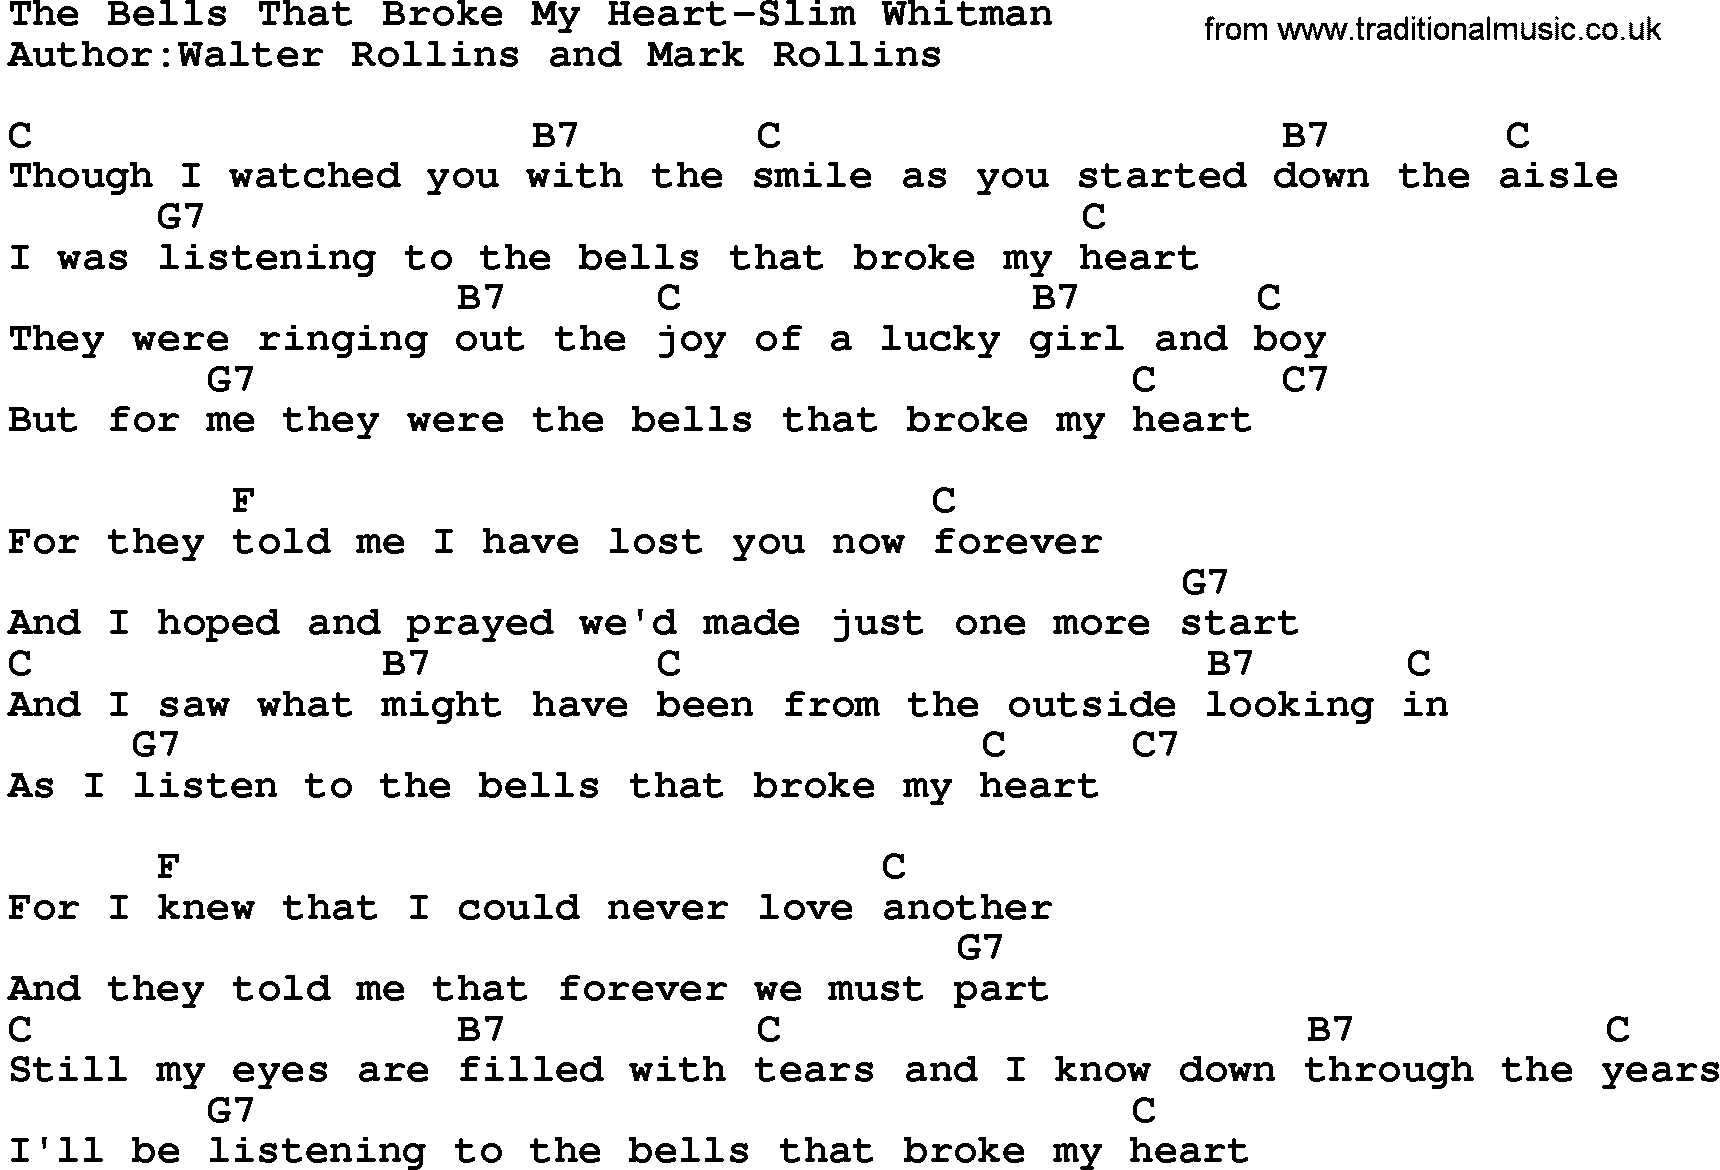 Country music song: The Bells That Broke My Heart-Slim Whitman lyrics and chords